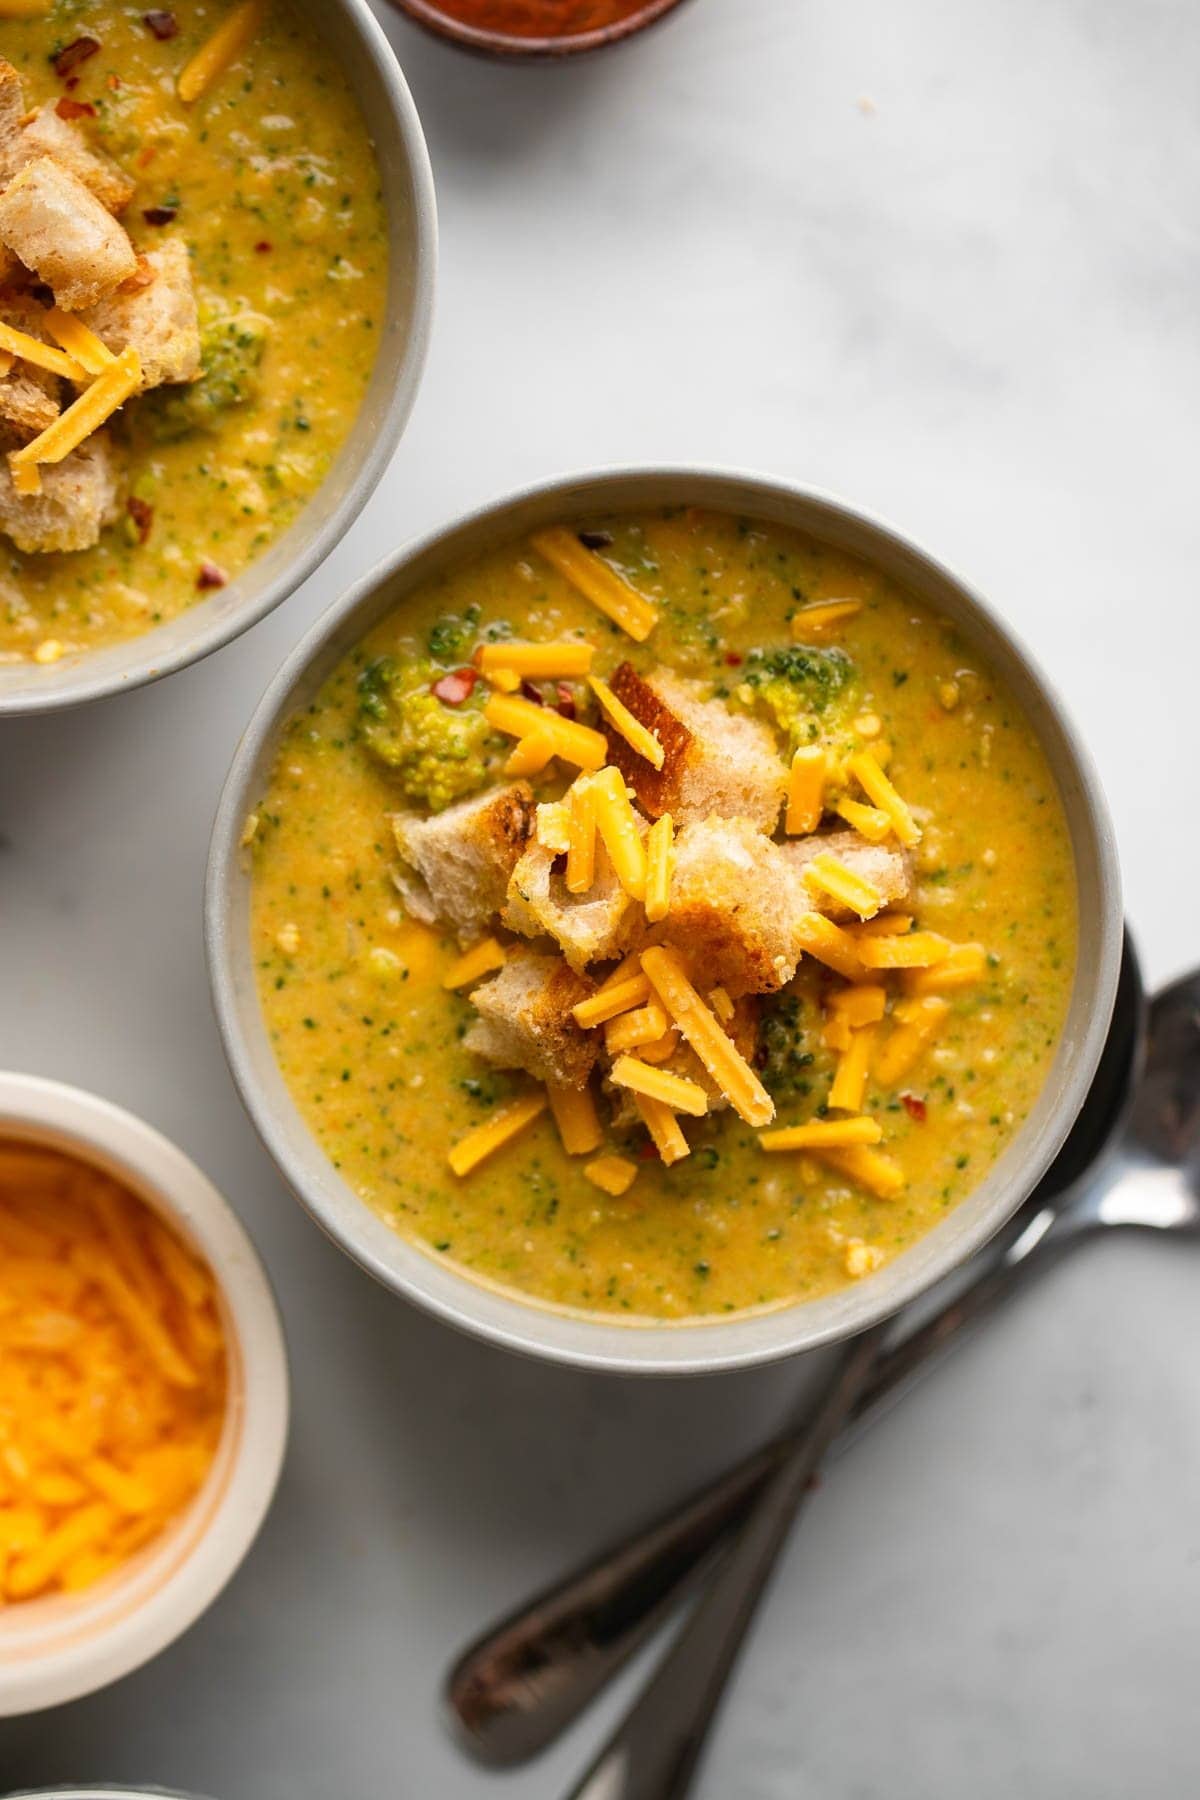 Vegan broccoli cheddar soup with croutons  in a bowl- top view